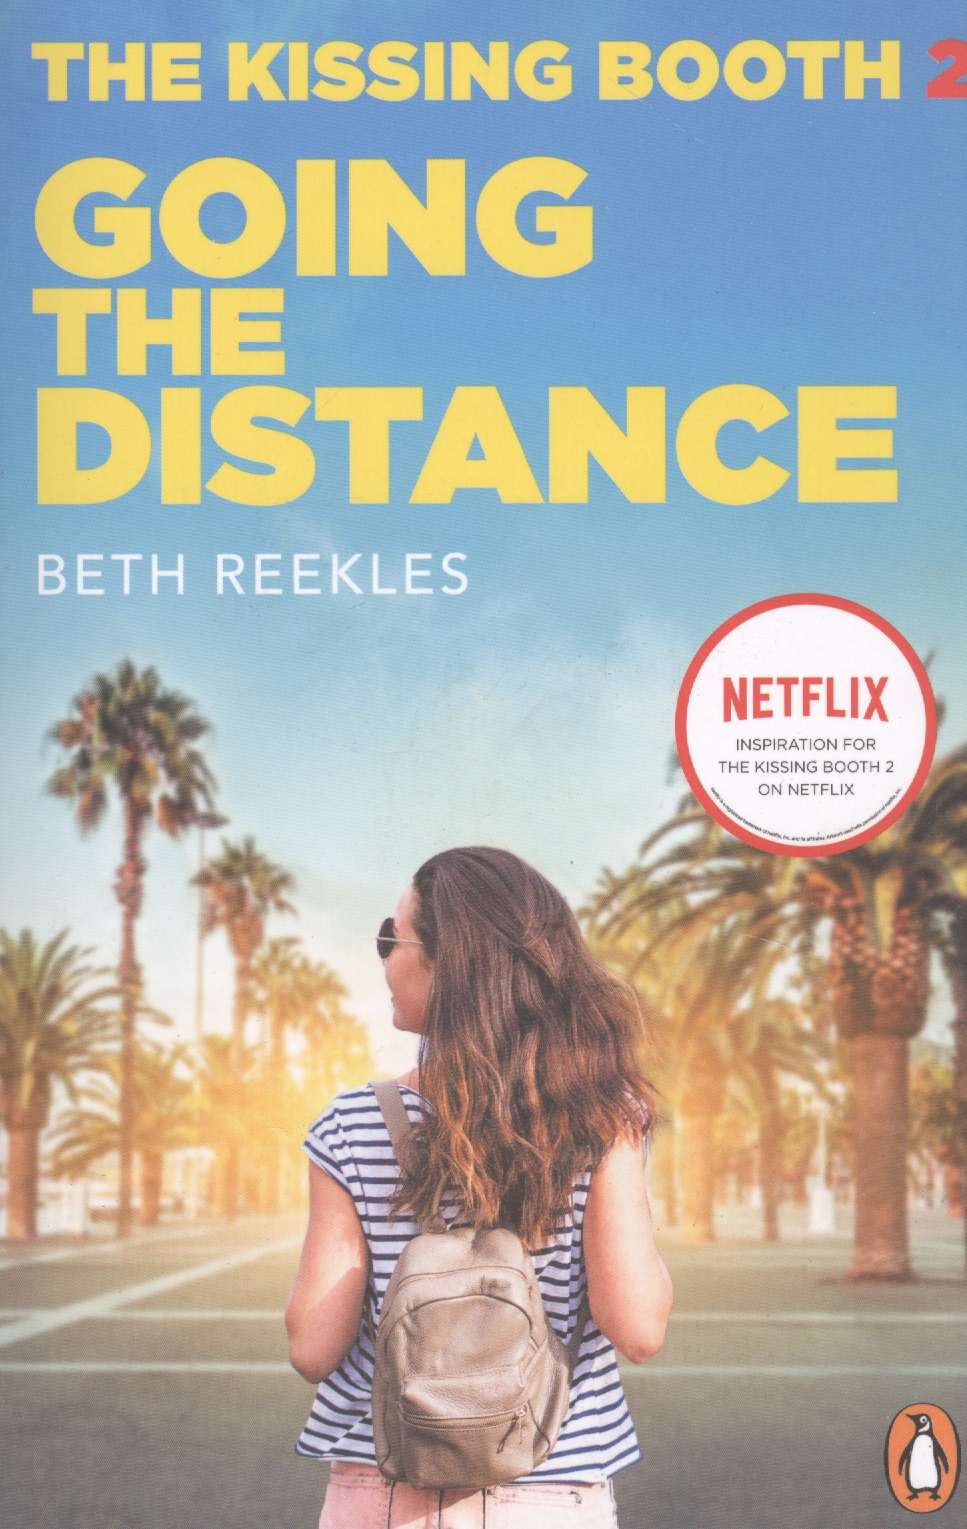 Reekles Beth The Kissing Booth 2: Going the Distance reekles b the kissing booth 3 one last time